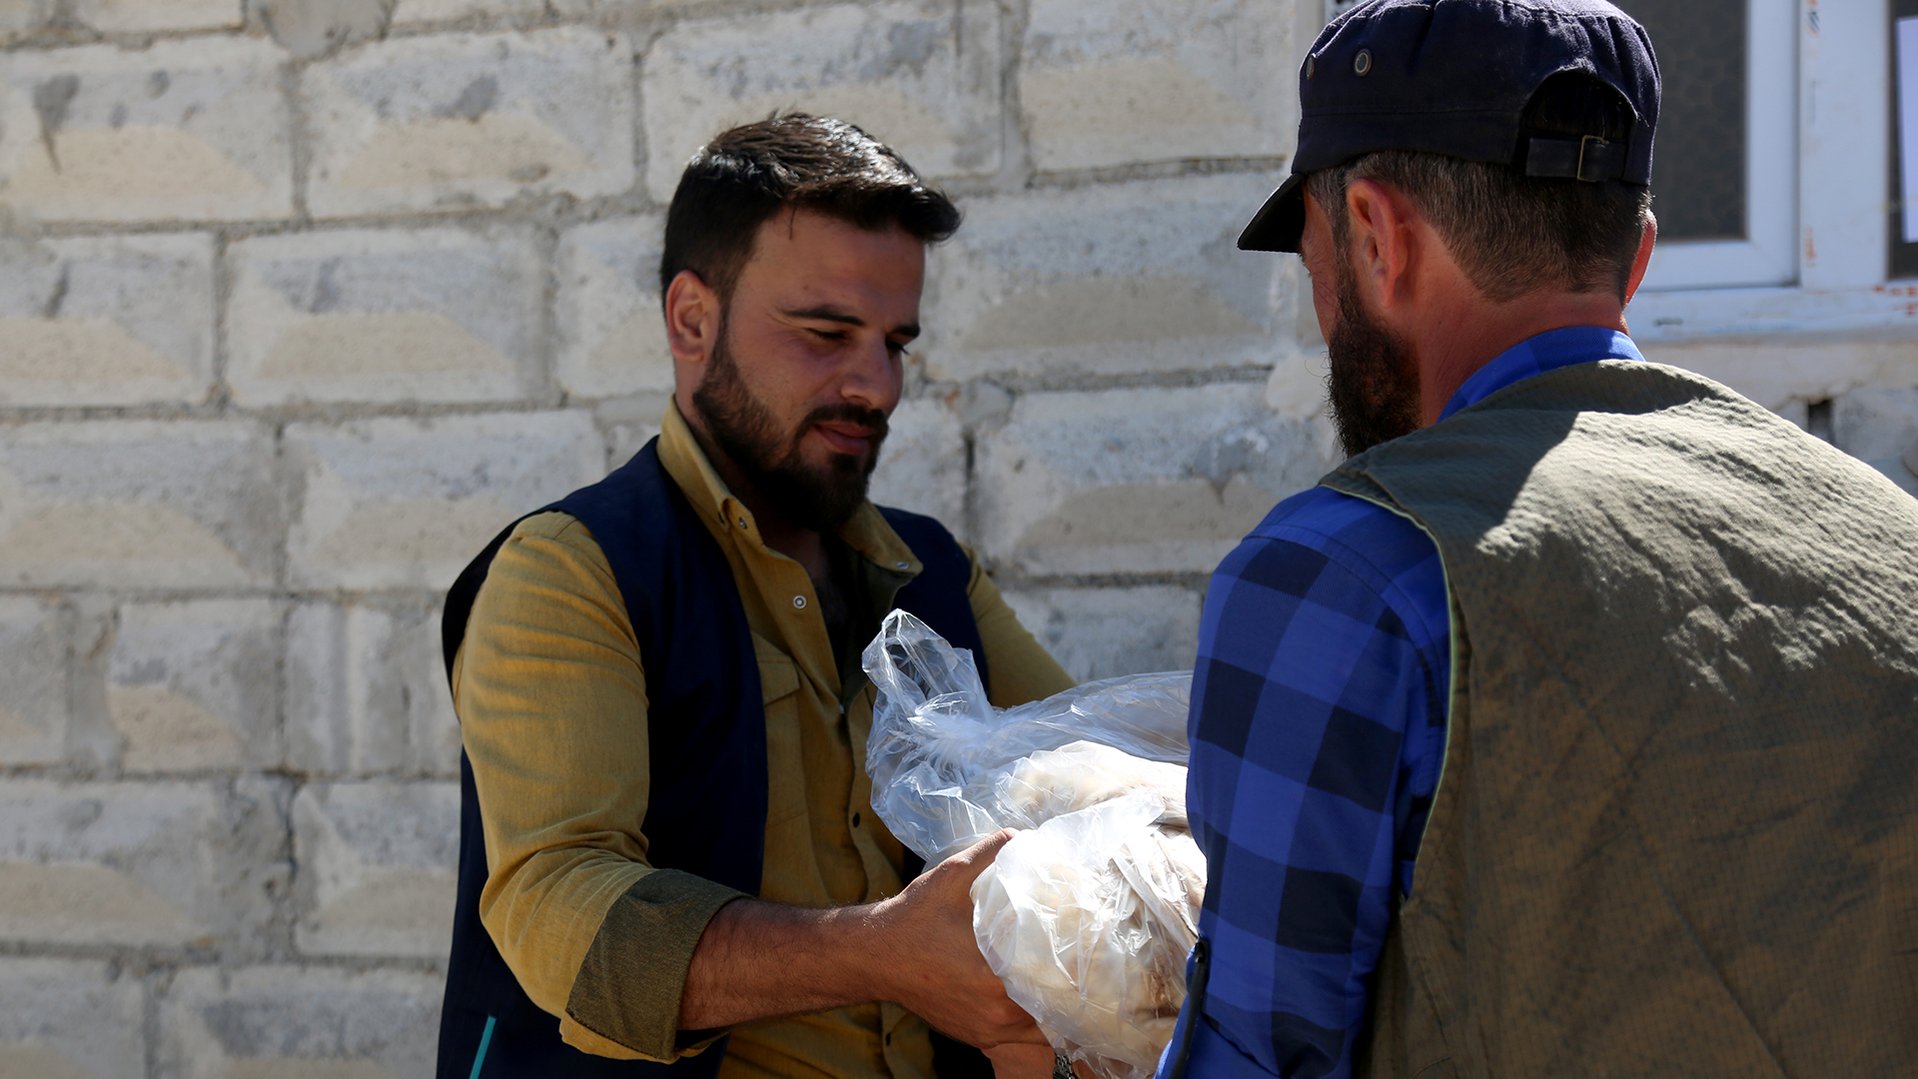 War Child is providing bread to Syrian families affected by the earthquakes in Syria